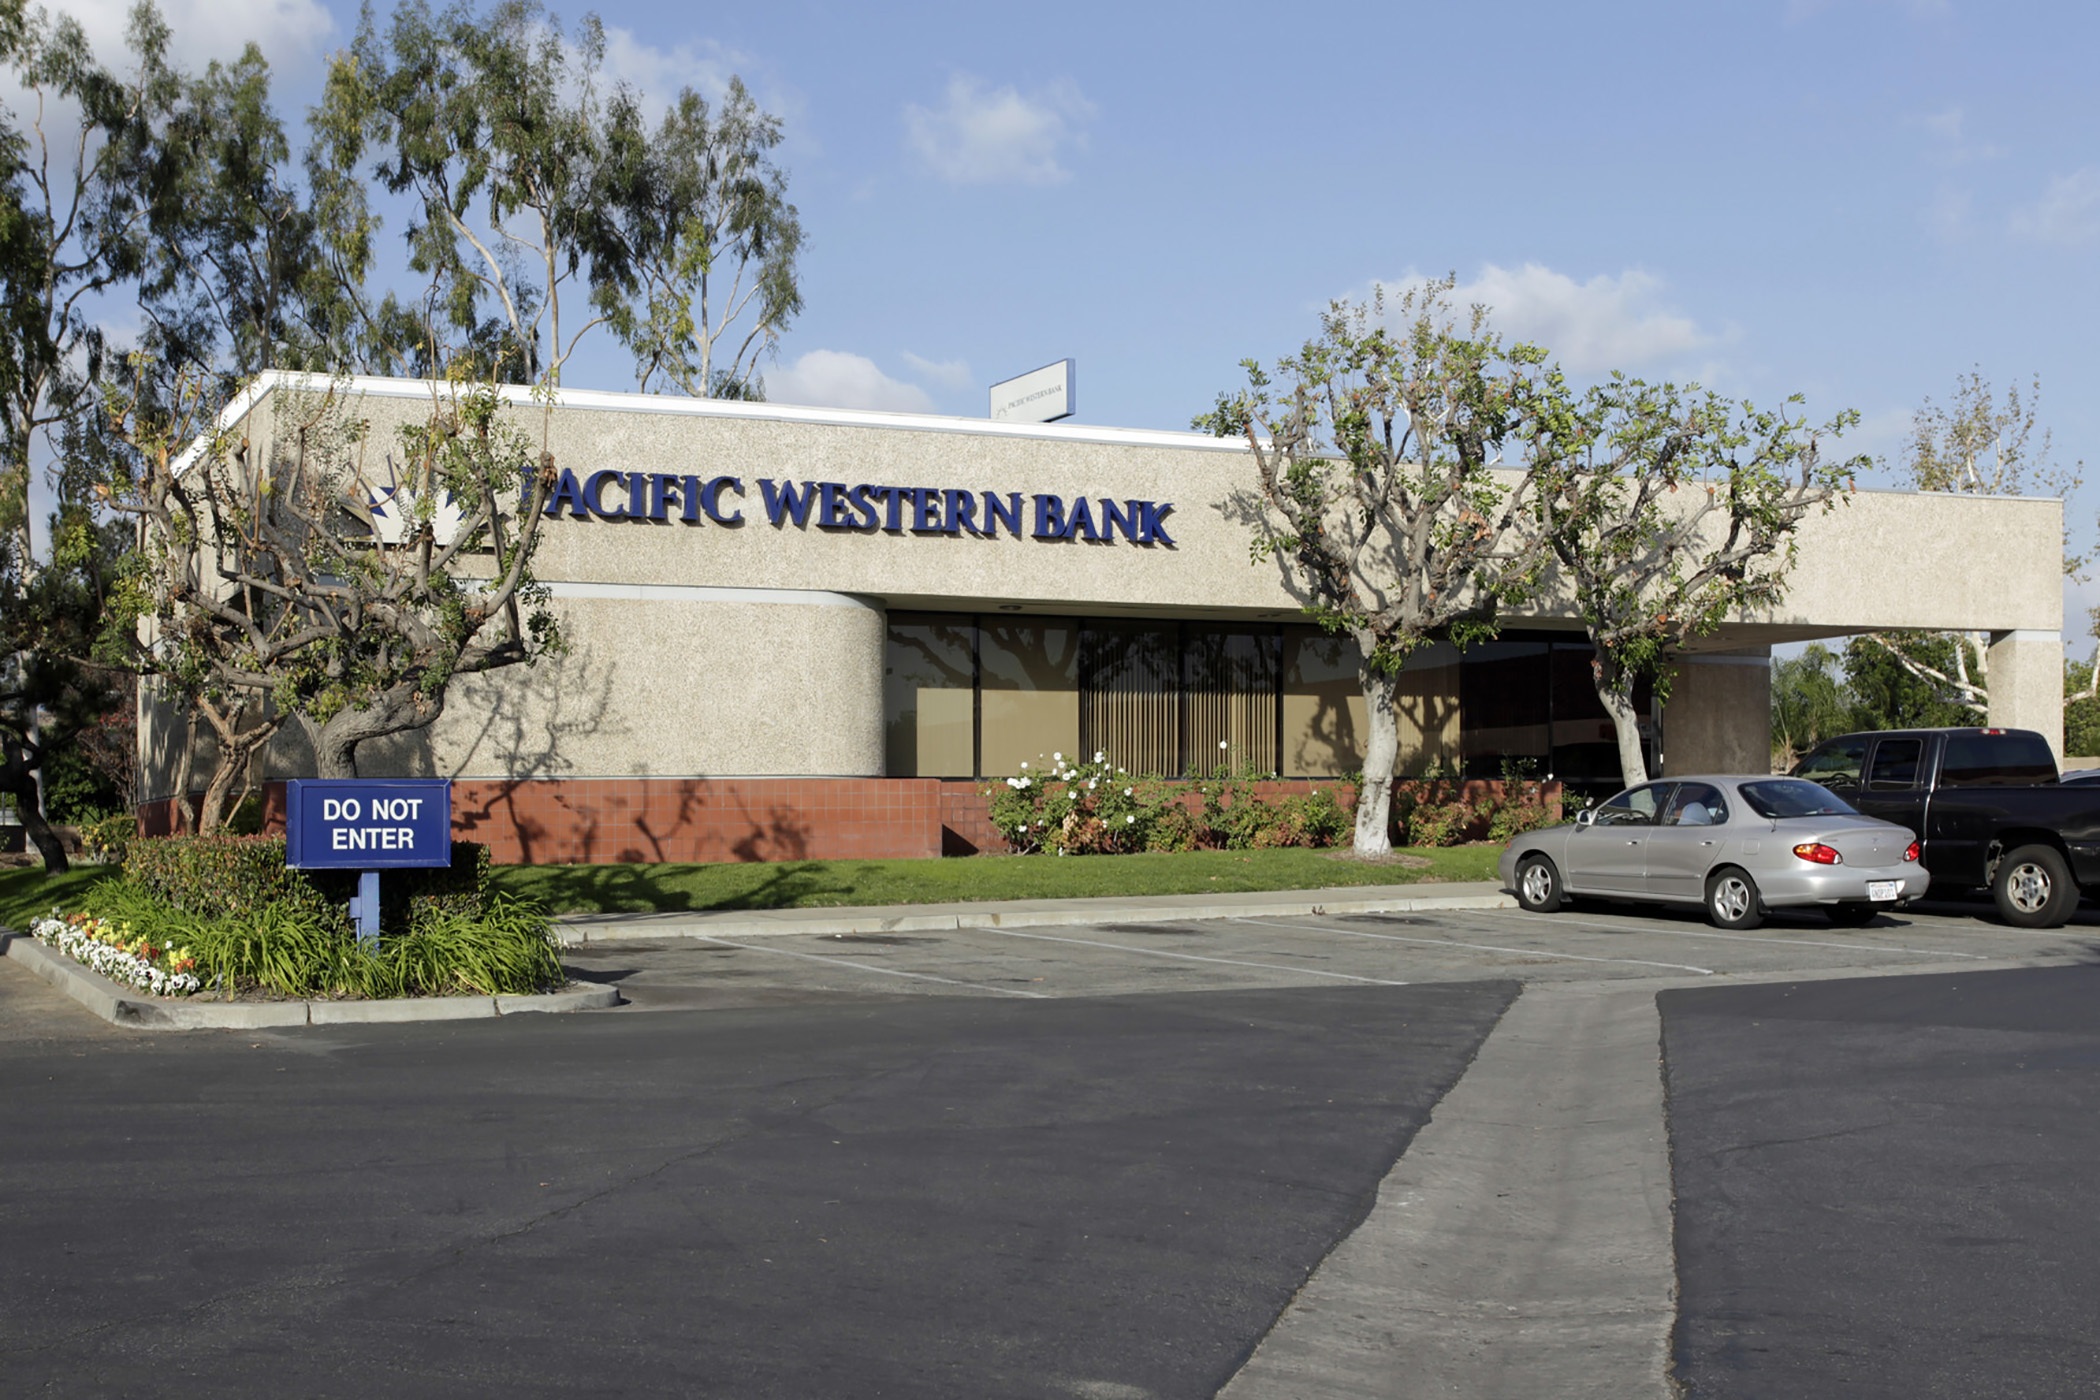 Pacific Western Bank is starting to rebuild deposits following a tumultuous March that saw two banks fail. (CoStar)